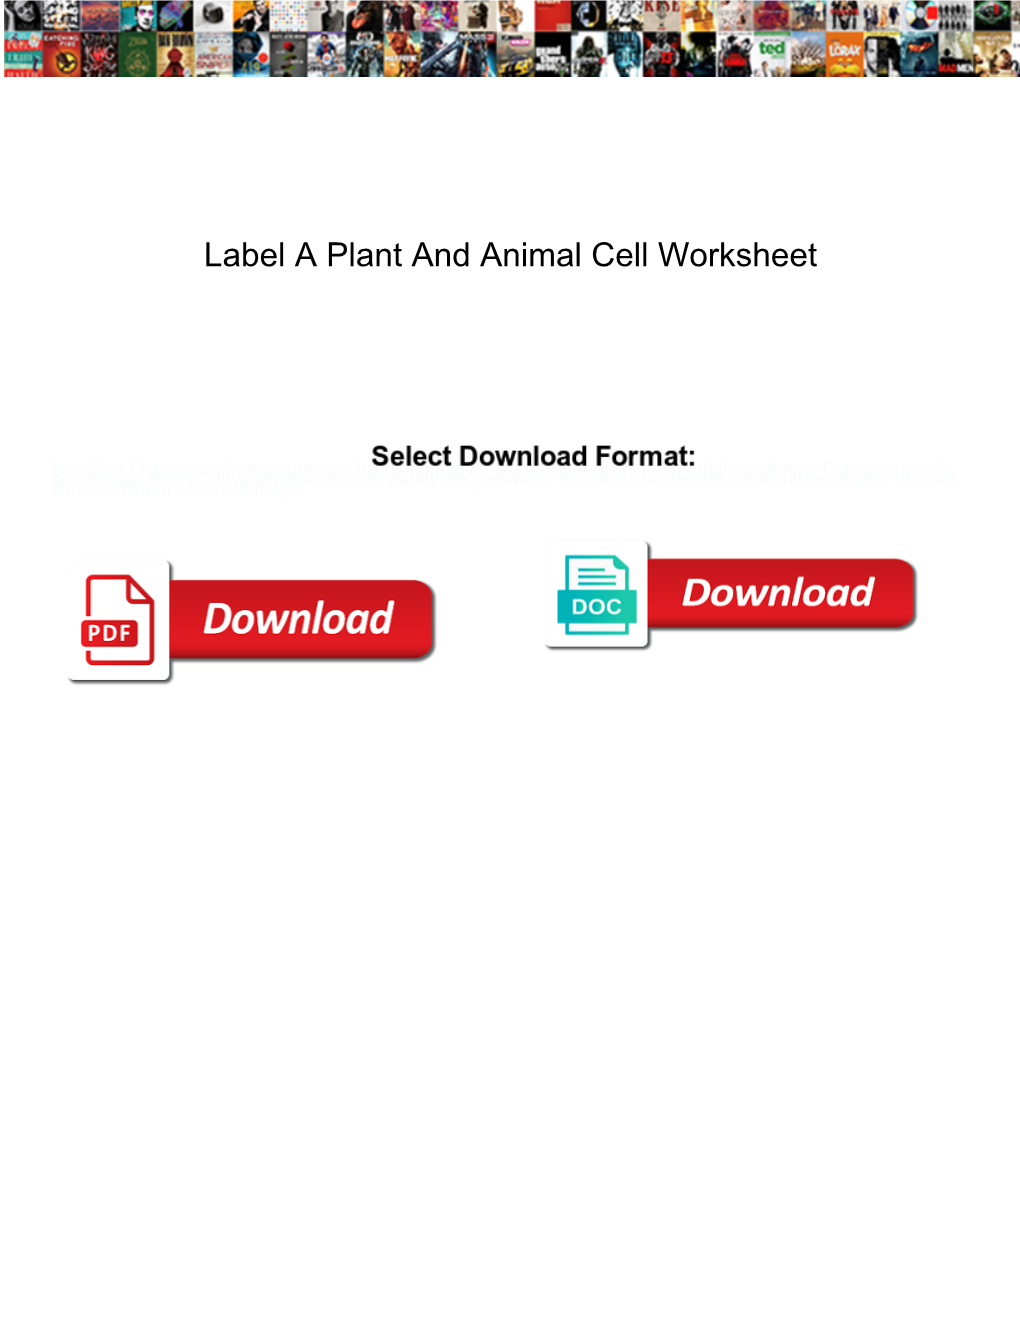 Label a Plant and Animal Cell Worksheet